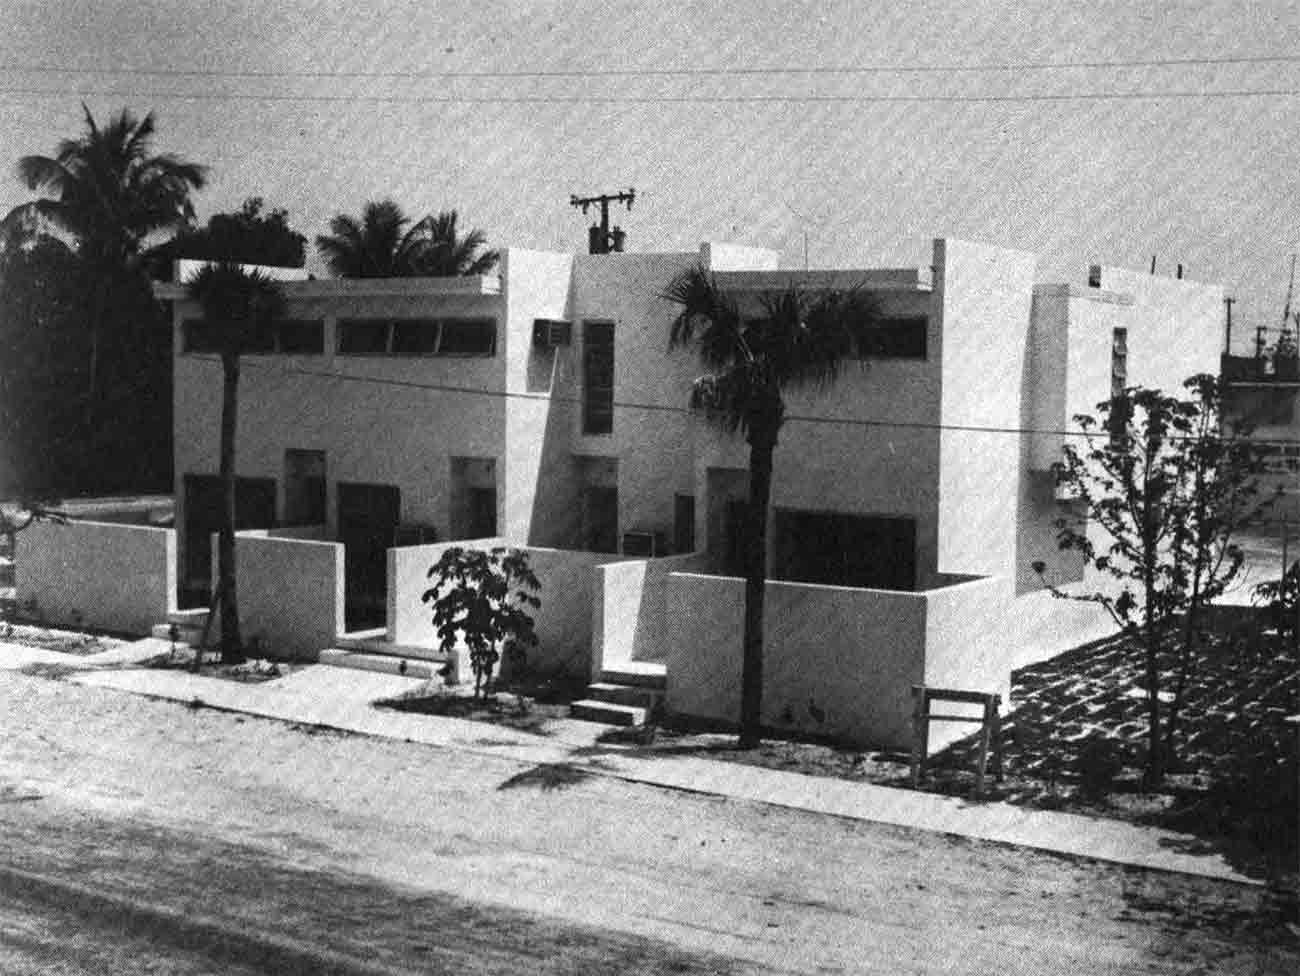 New 2- and 4-bedroom affordable townhouses nearing completion in Florida, 1971.